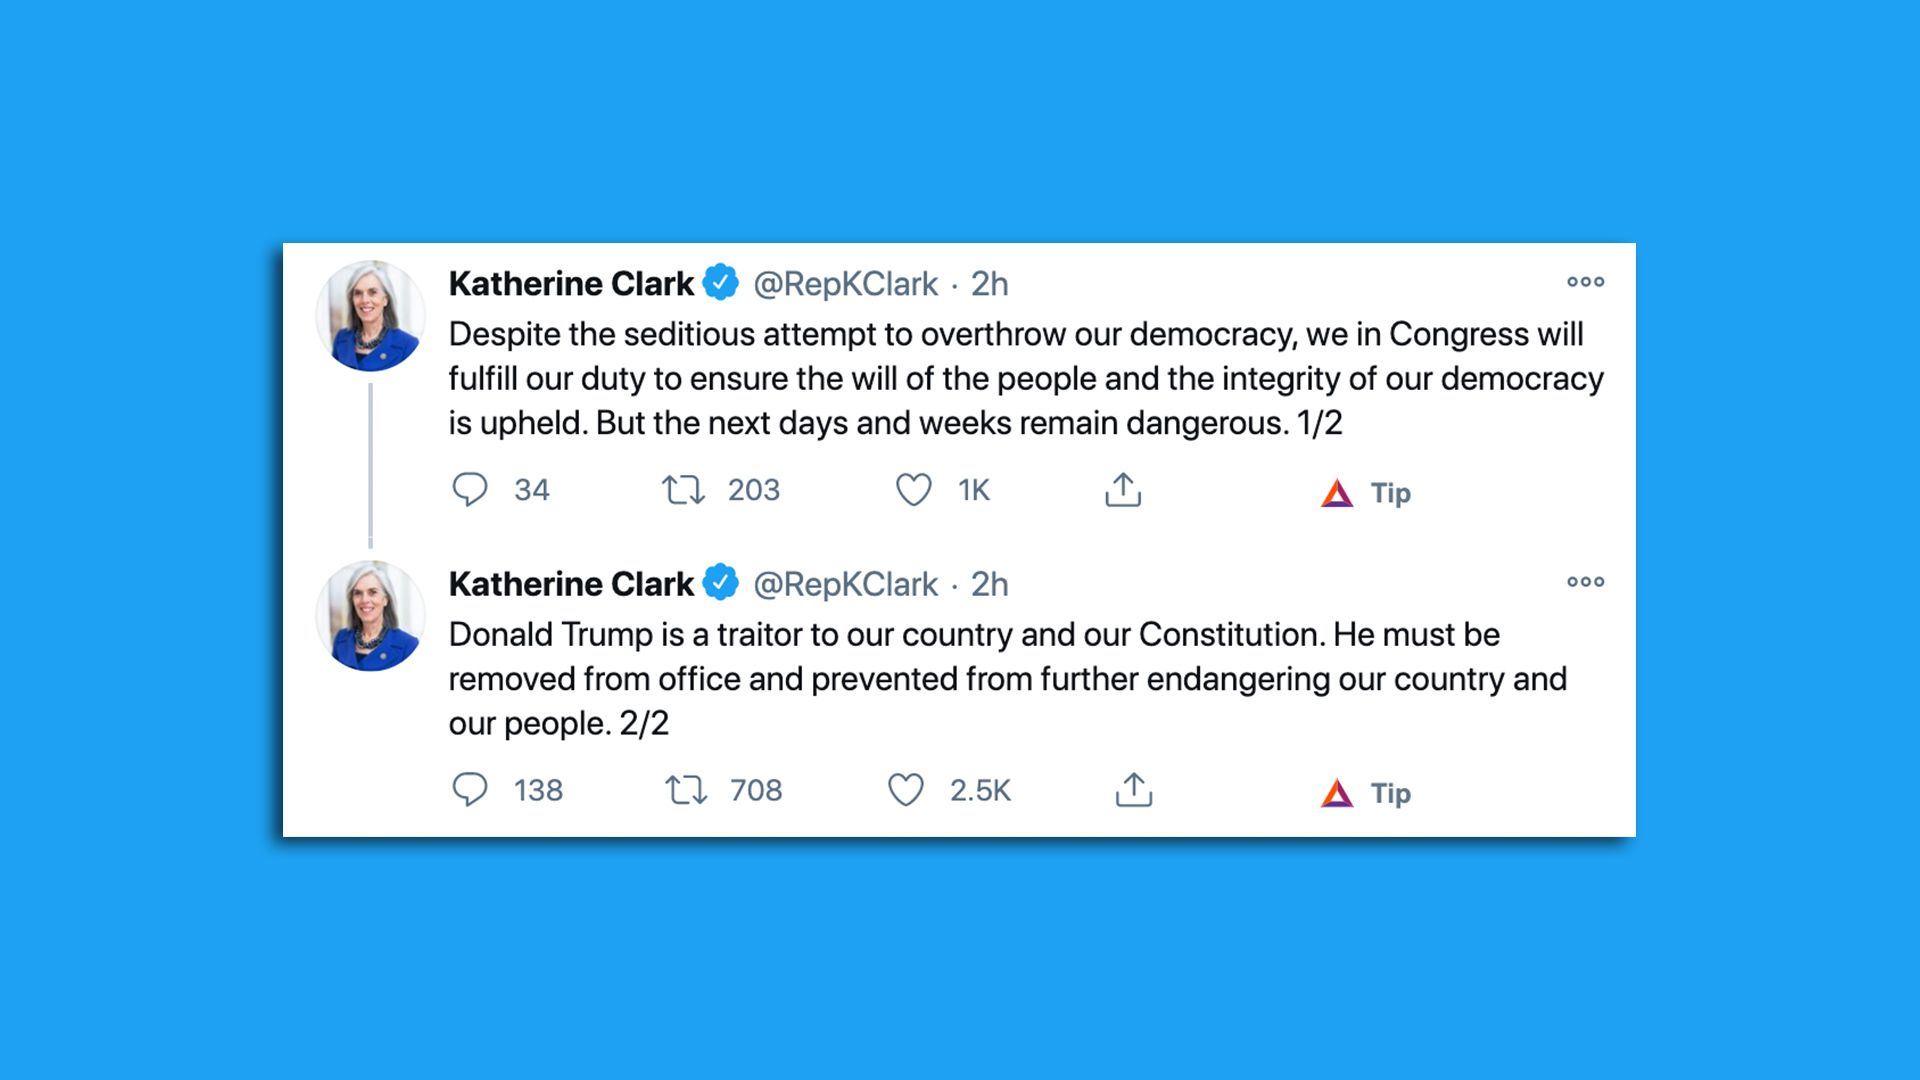 A photo array shows two tweets by Rep. Katherine Clark protesting President Trump.